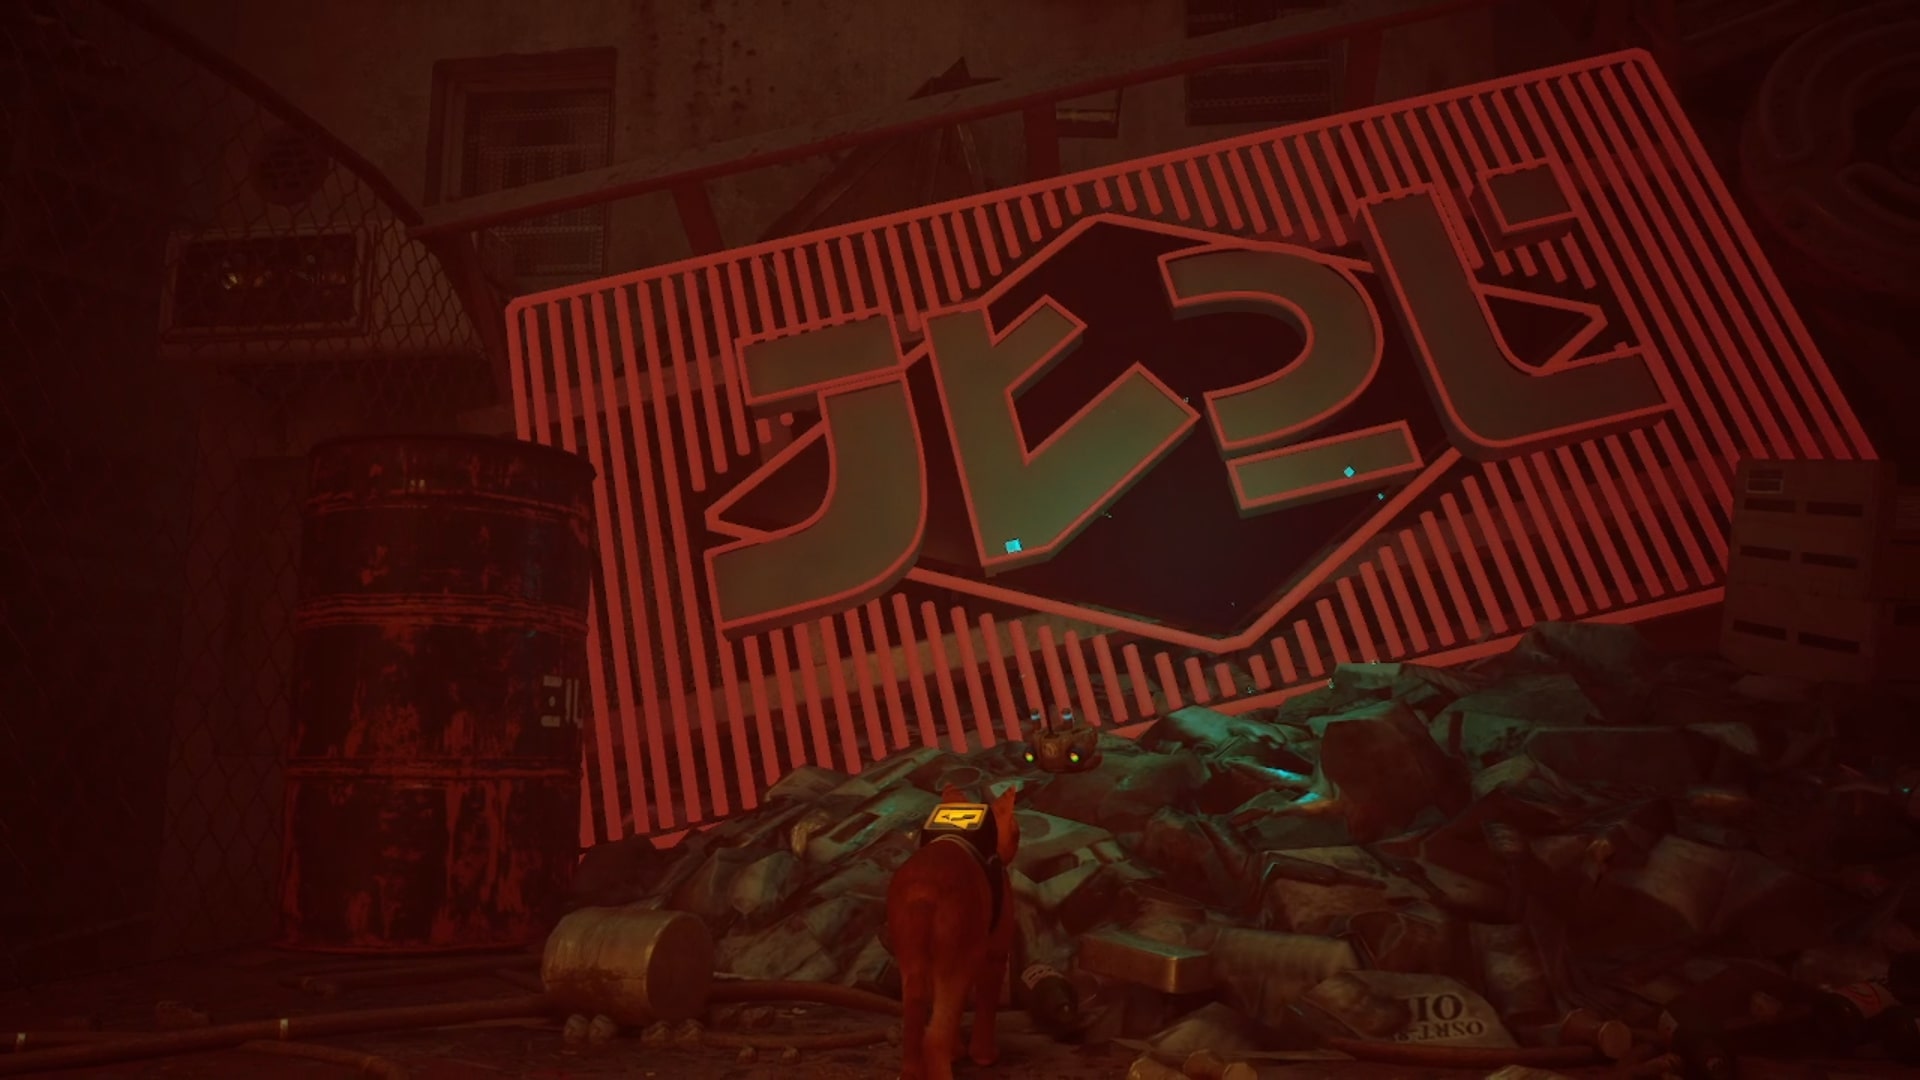 Stray memories guide: The orange tabby and B-12 standing before the enormous red neon sign bearing four letters in robot language, sitting upon a small mountain of litter